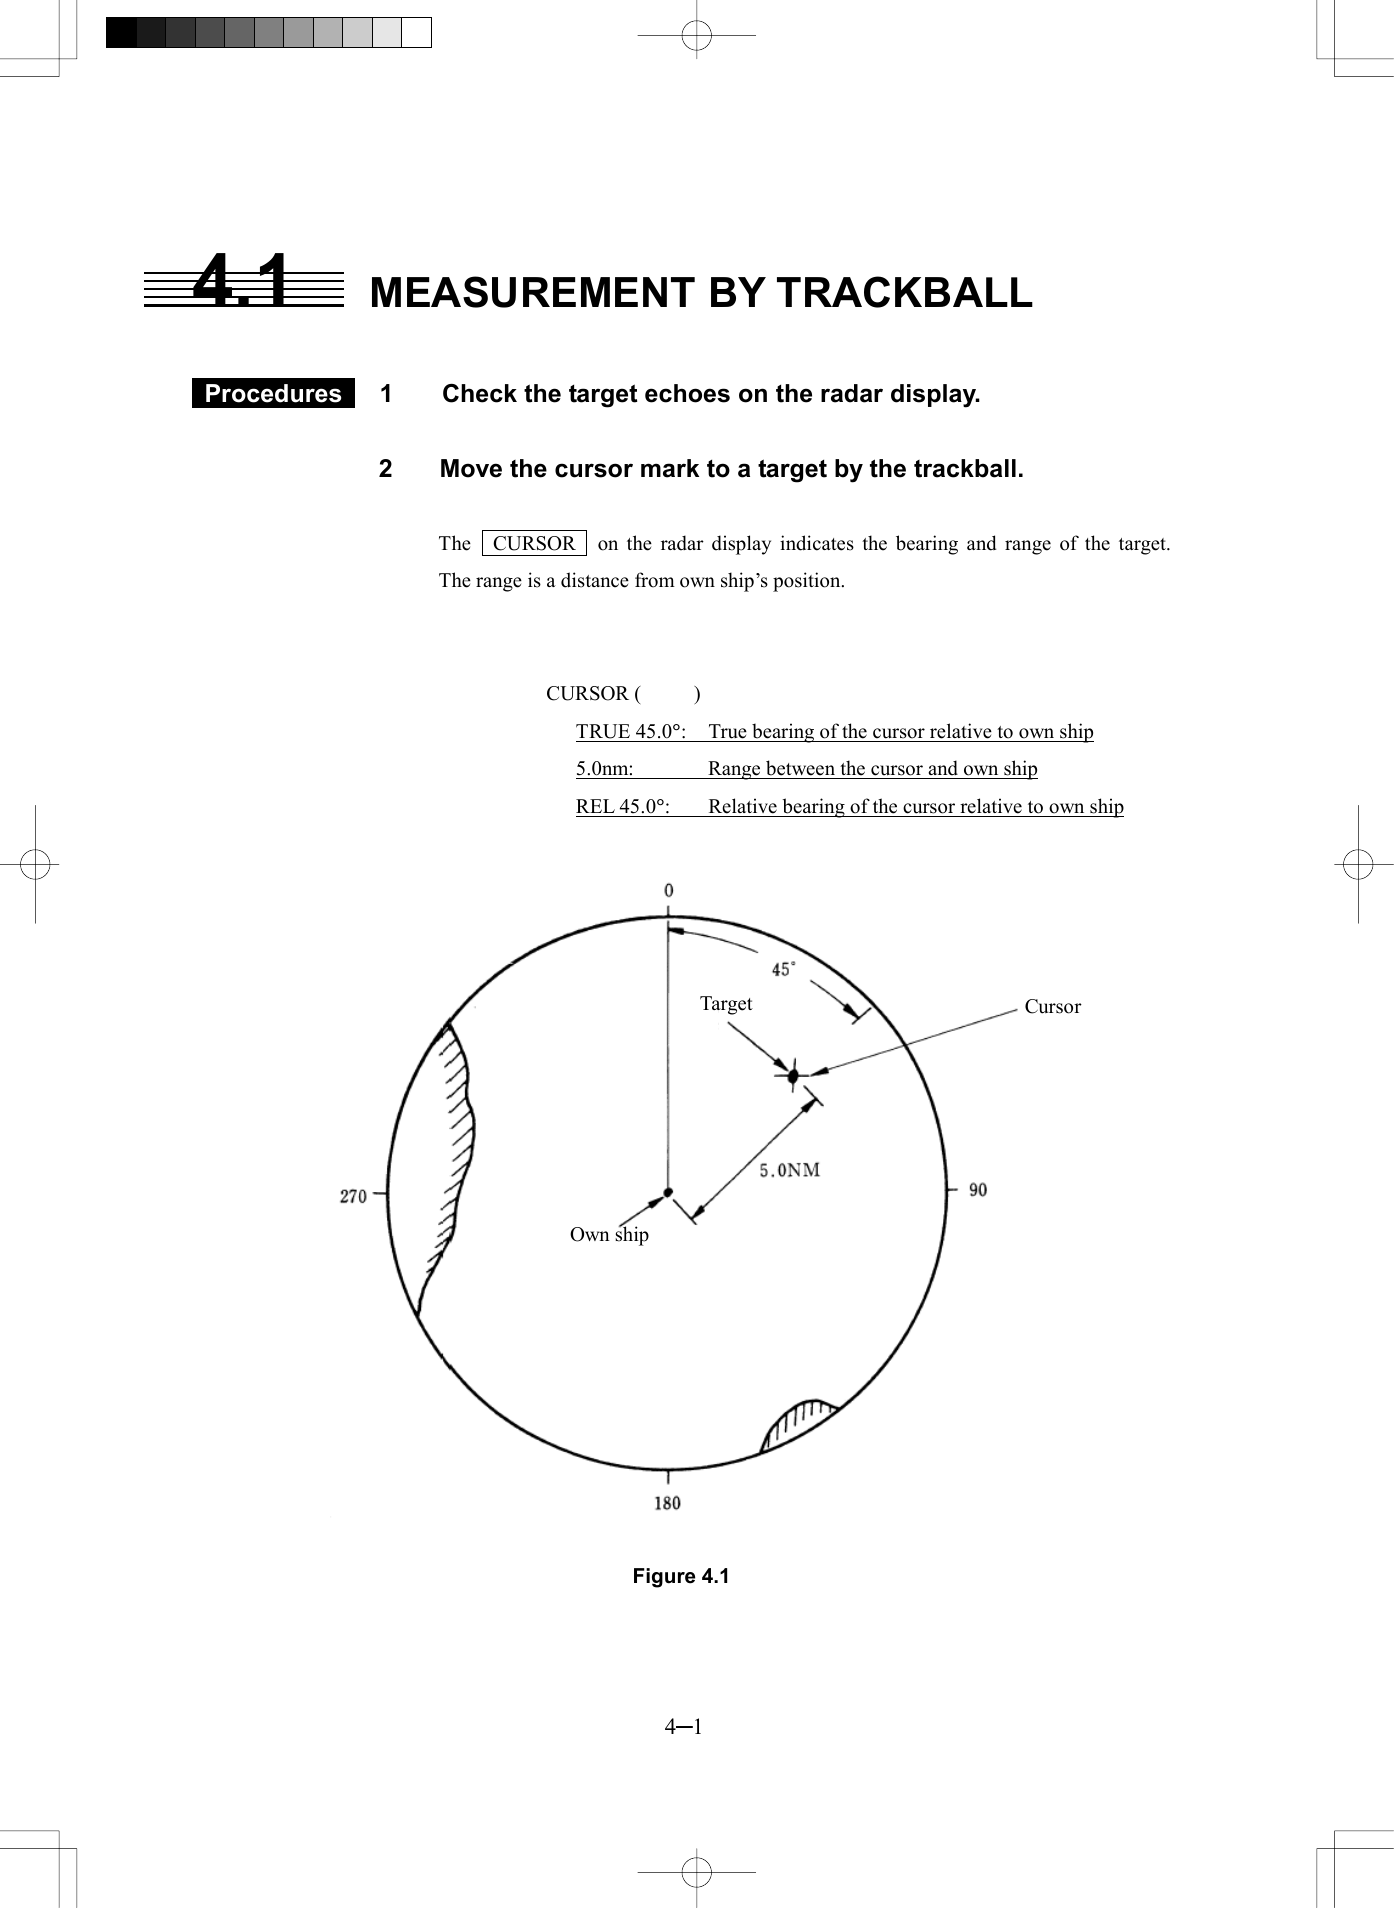  4─1 4.1  MEASUREMENT BY TRACKBALL   Procedures  1  Check the target echoes on the radar display.  2  Move the cursor mark to a target by the trackball.  The   CURSOR   on the radar display indicates the bearing and range of the target.   The range is a distance from own ship’s position.   CURSOR (     ) TRUE 45.0°:  True bearing of the cursor relative to own ship 5.0nm:  Range between the cursor and own ship REL 45.0°:  Relative bearing of the cursor relative to own ship   Figure 4.1  Target CursorOwn ship